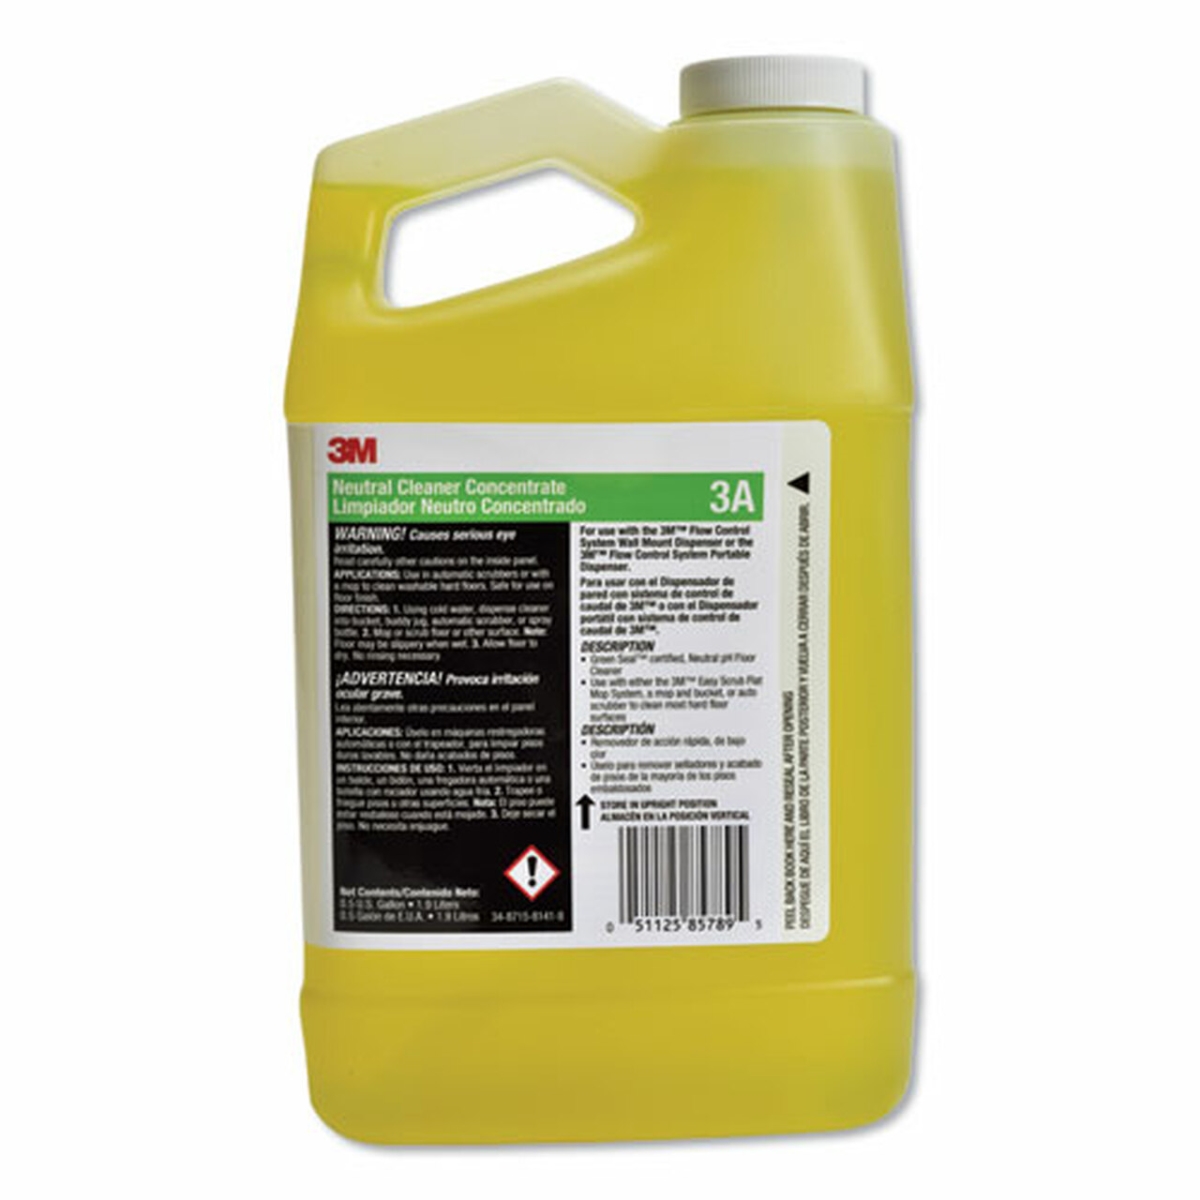 Neutral Cleaner Concentrate 3A, Fresh Scent, 0.5 gal Bottle, 4/Case